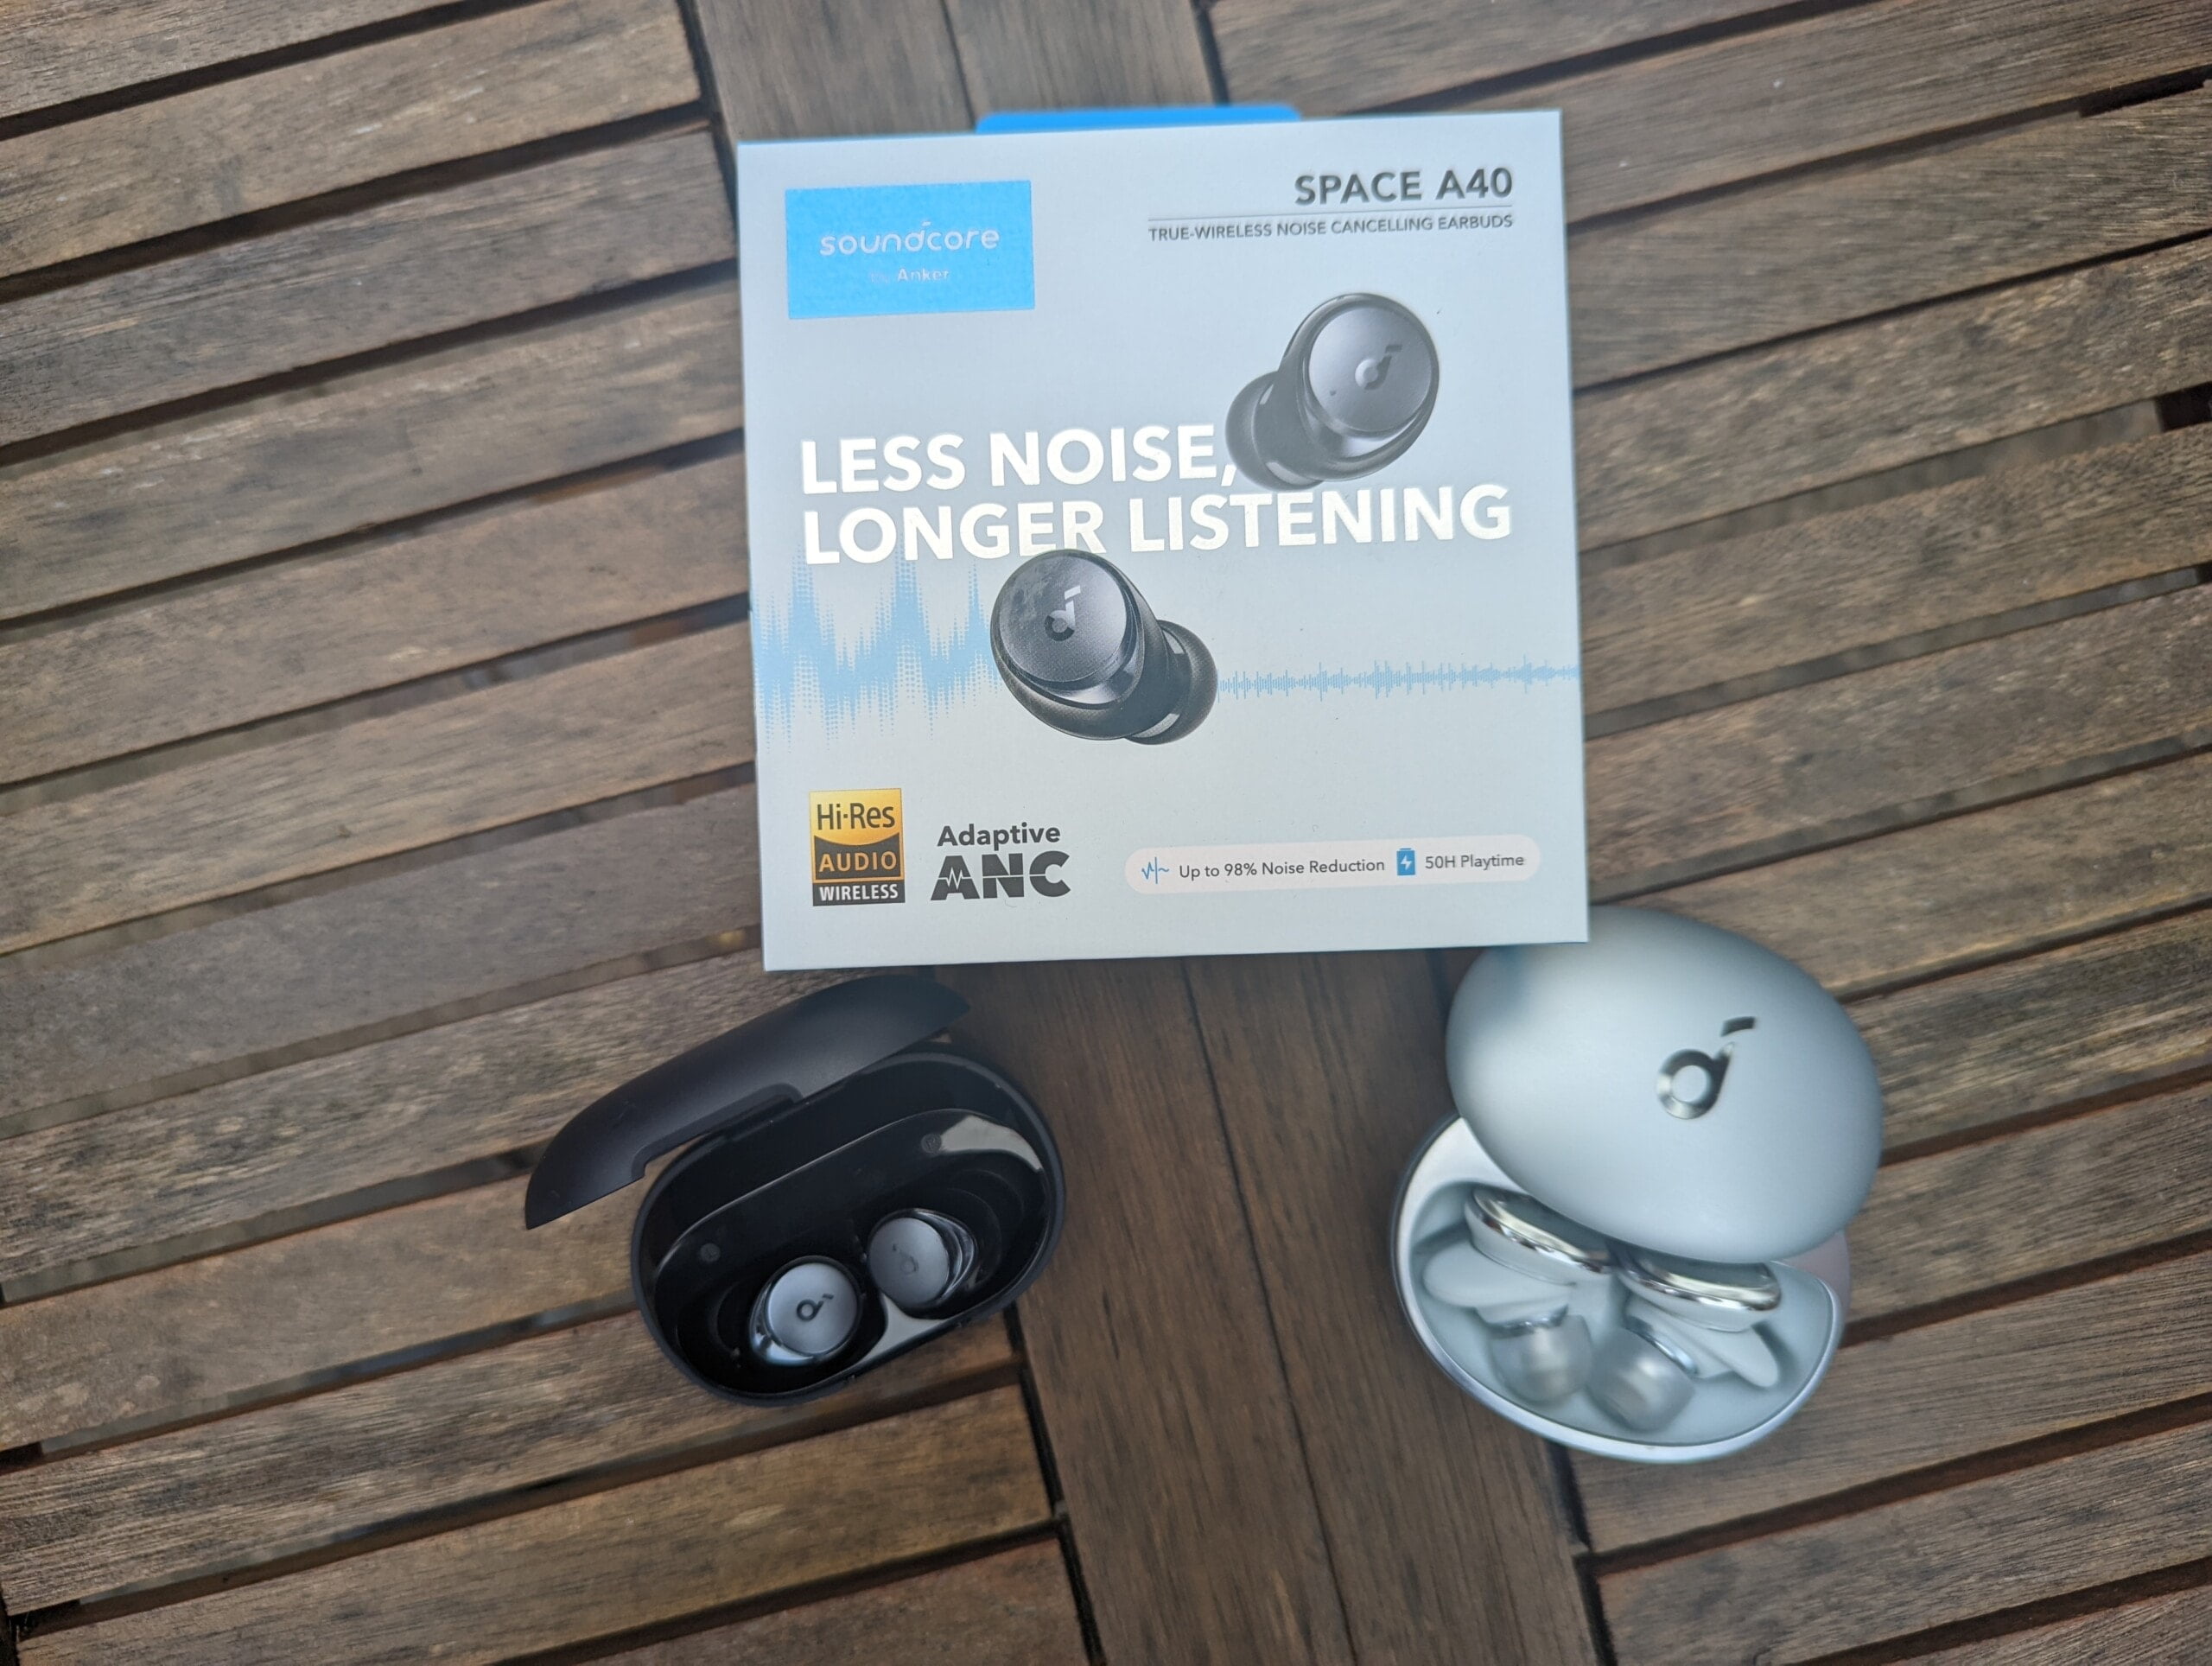 Anker Soundcore Space A40 Review – True Wireless Noise Cancelling Earbuds